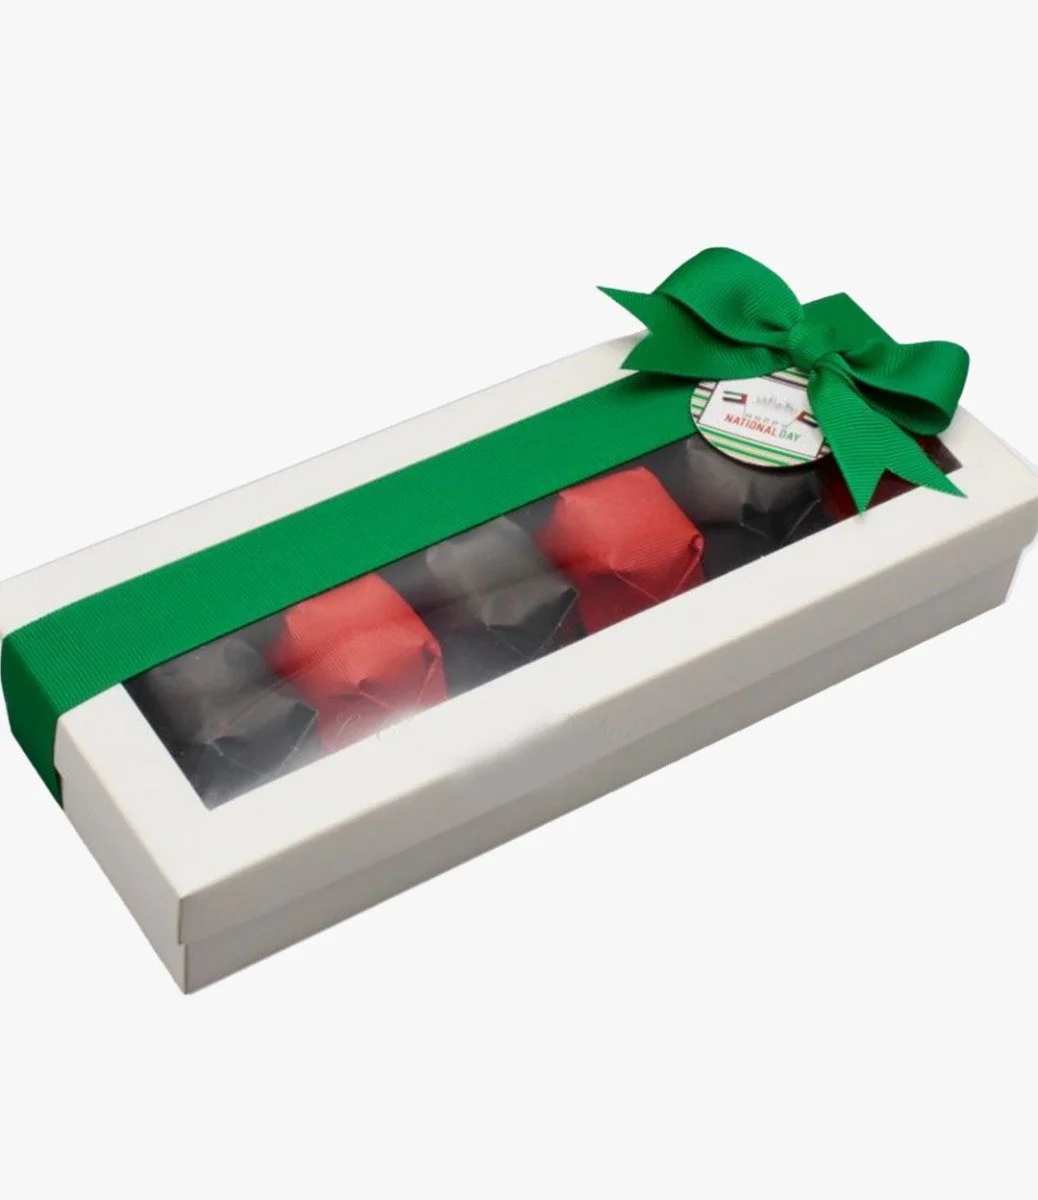 National Day Chocolate Box by Le Chocolatier